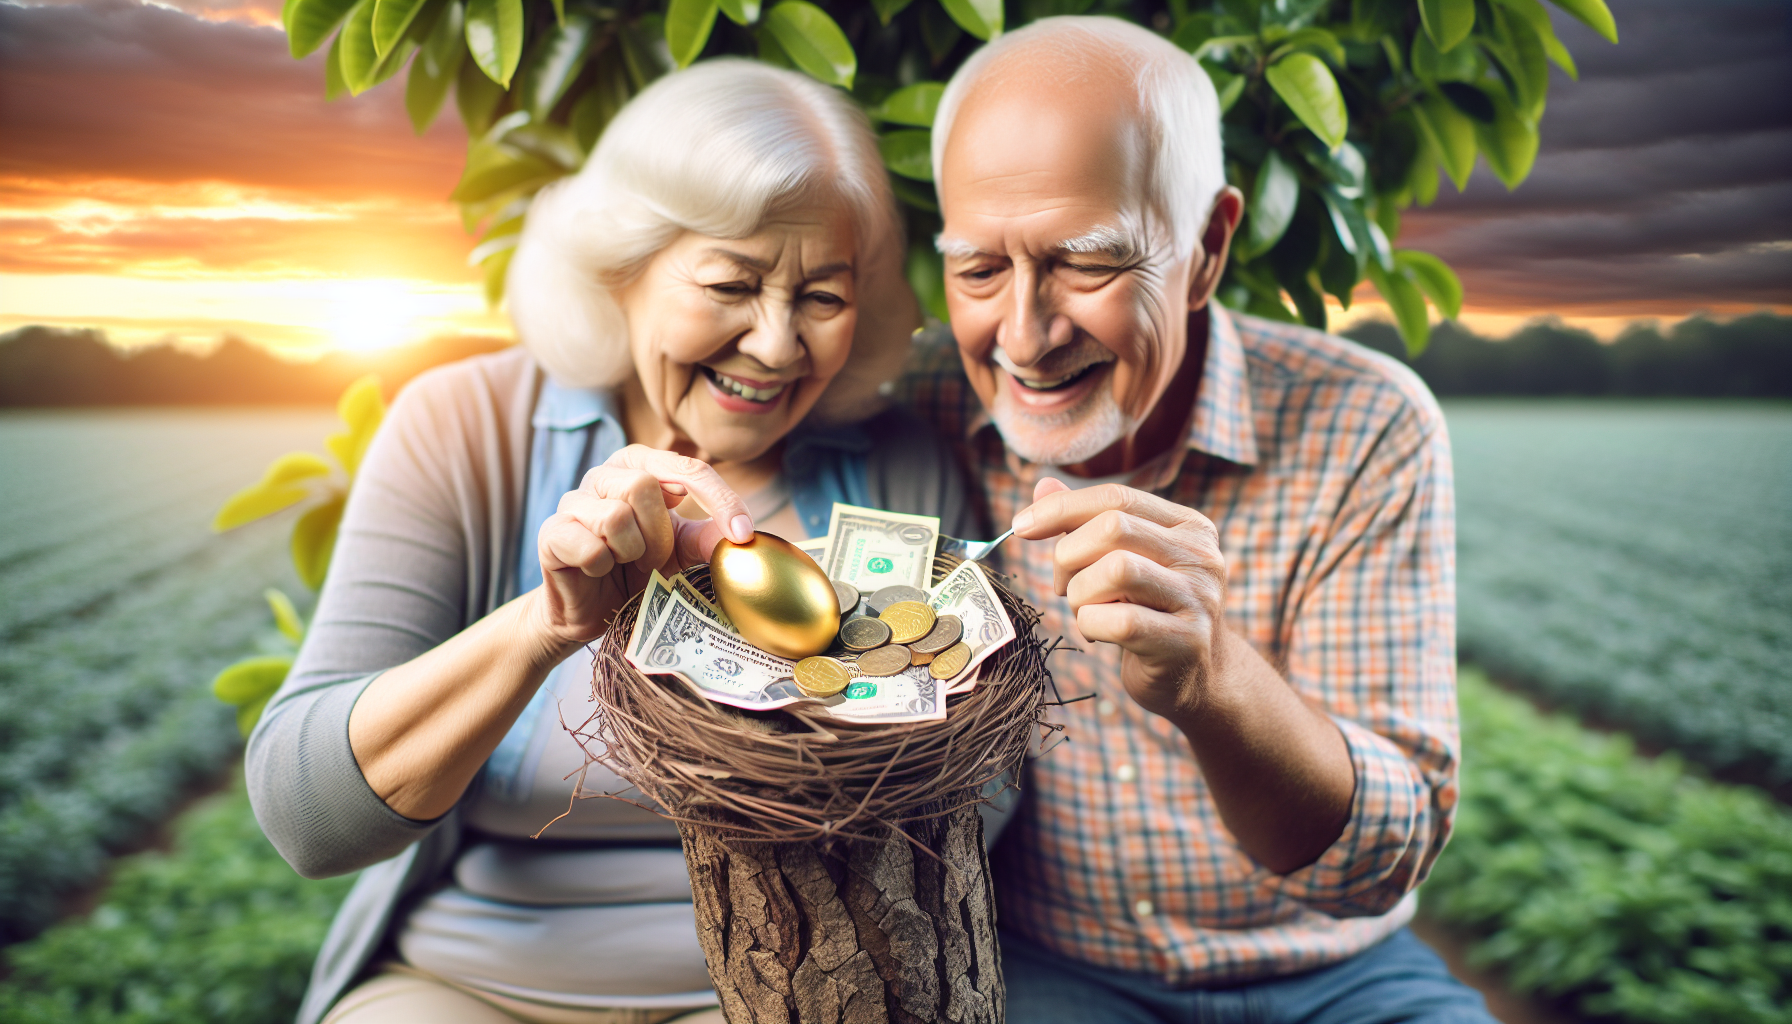 Financial security for retirement through employer benefits